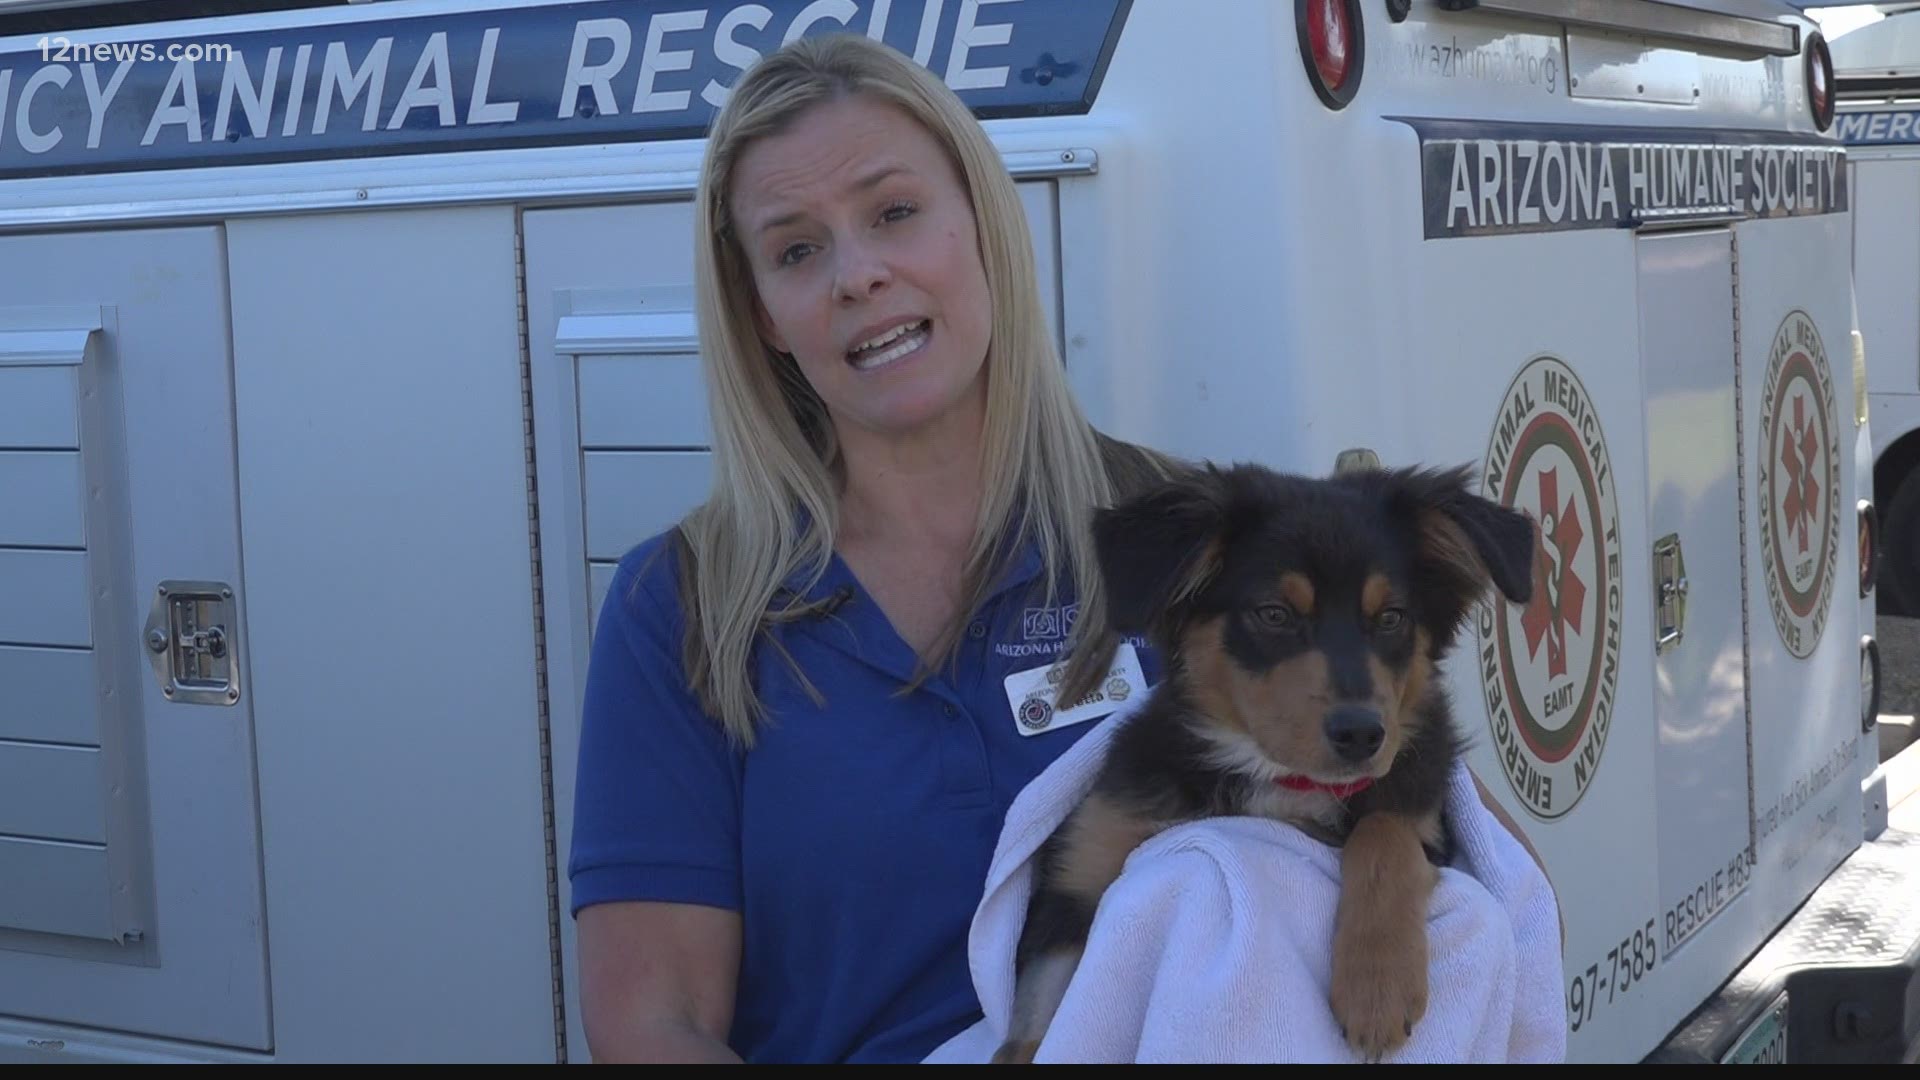 With temperatures rising, the Arizona Humane Society said it's time to start limiting your pets' time outdoors.